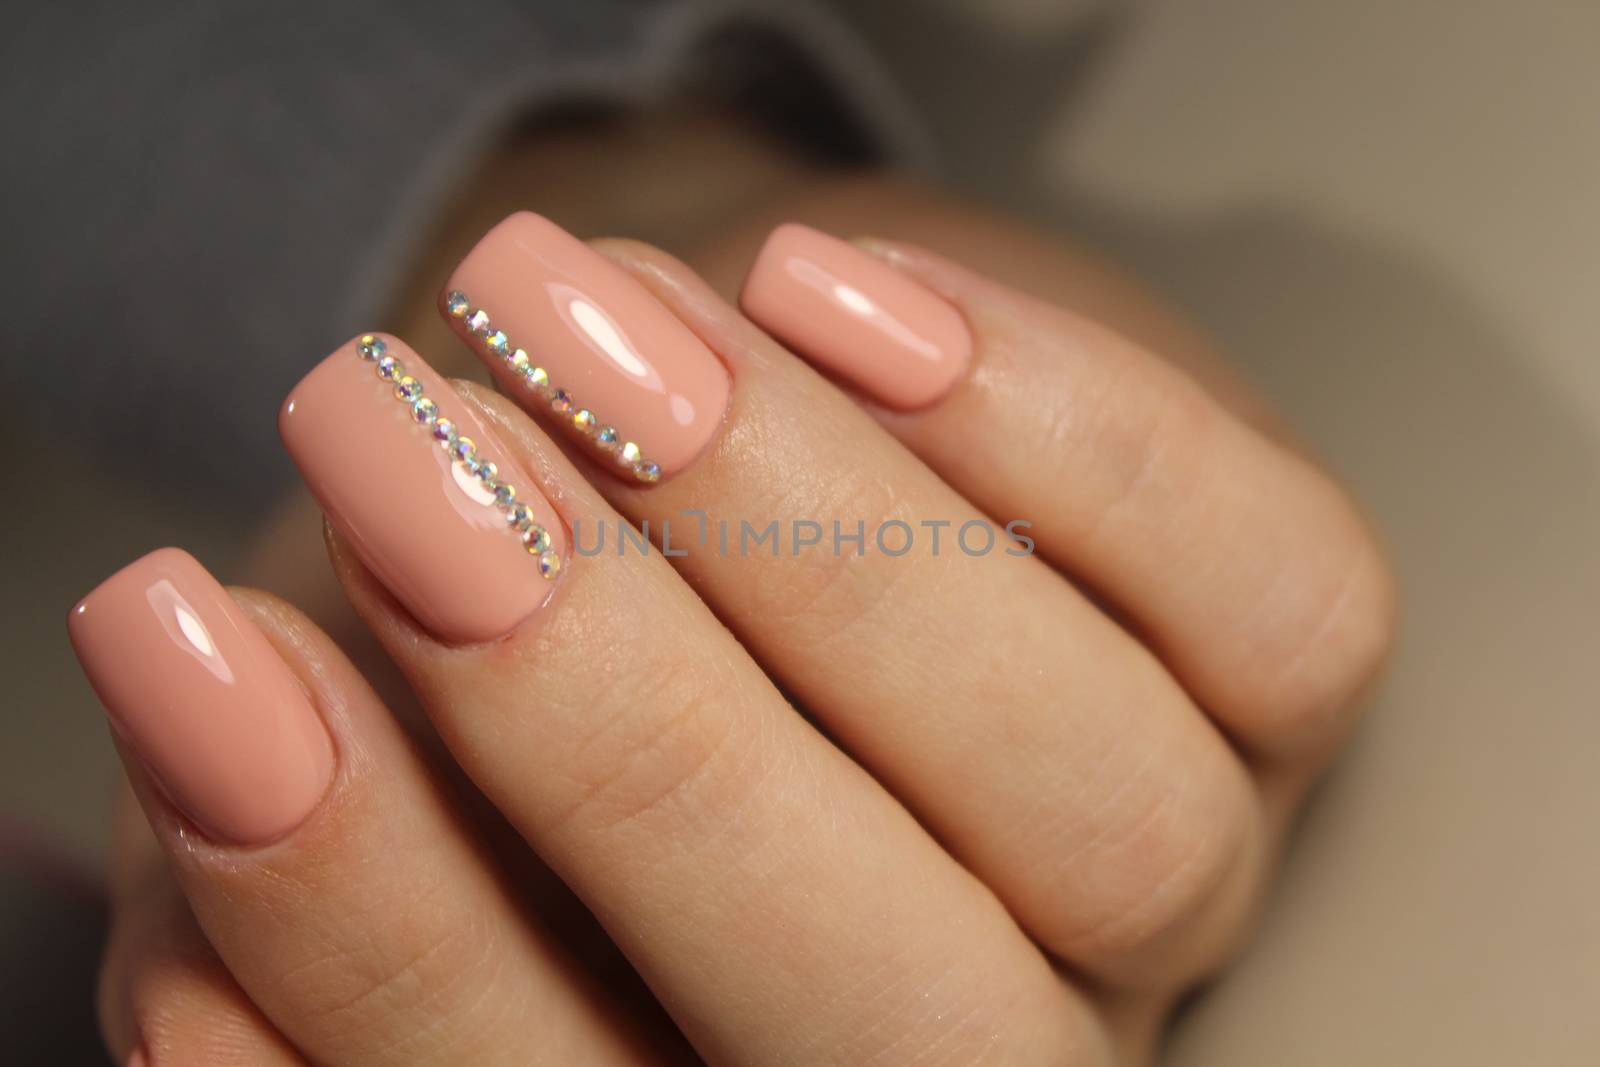 The beauty of the natural nails. Perfect clean manicure